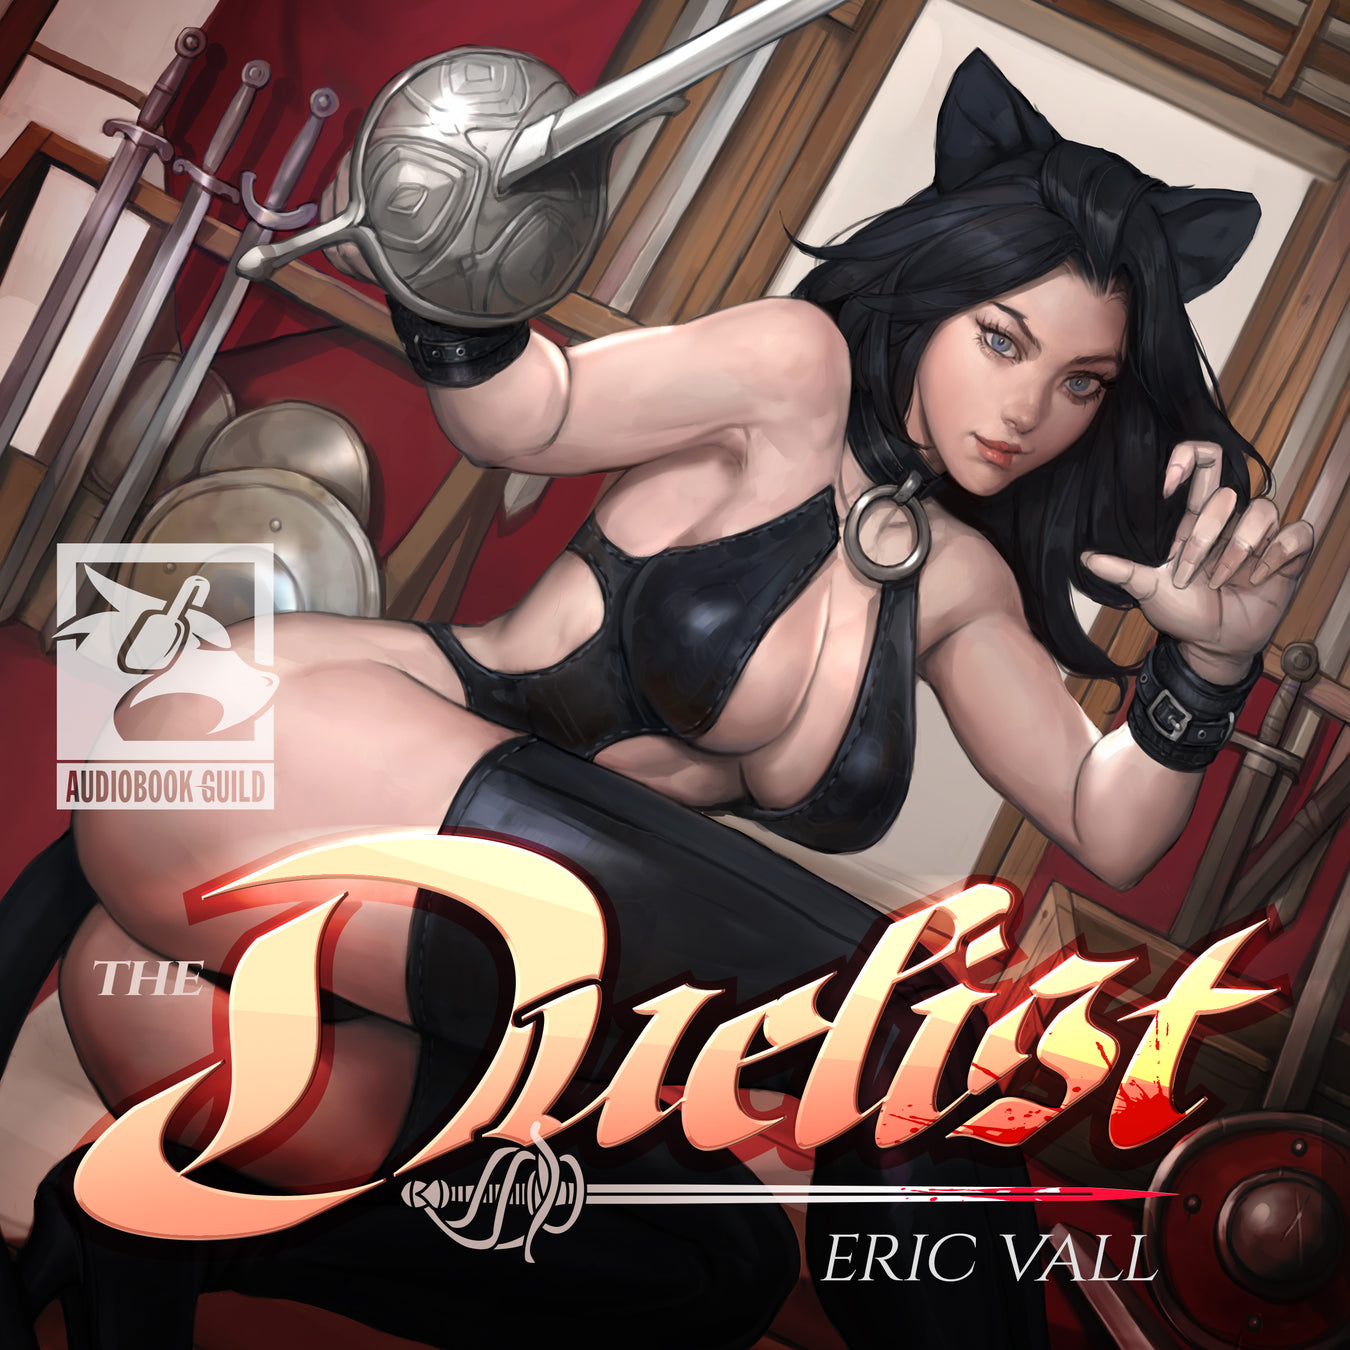 The Duelist by Eric Vall